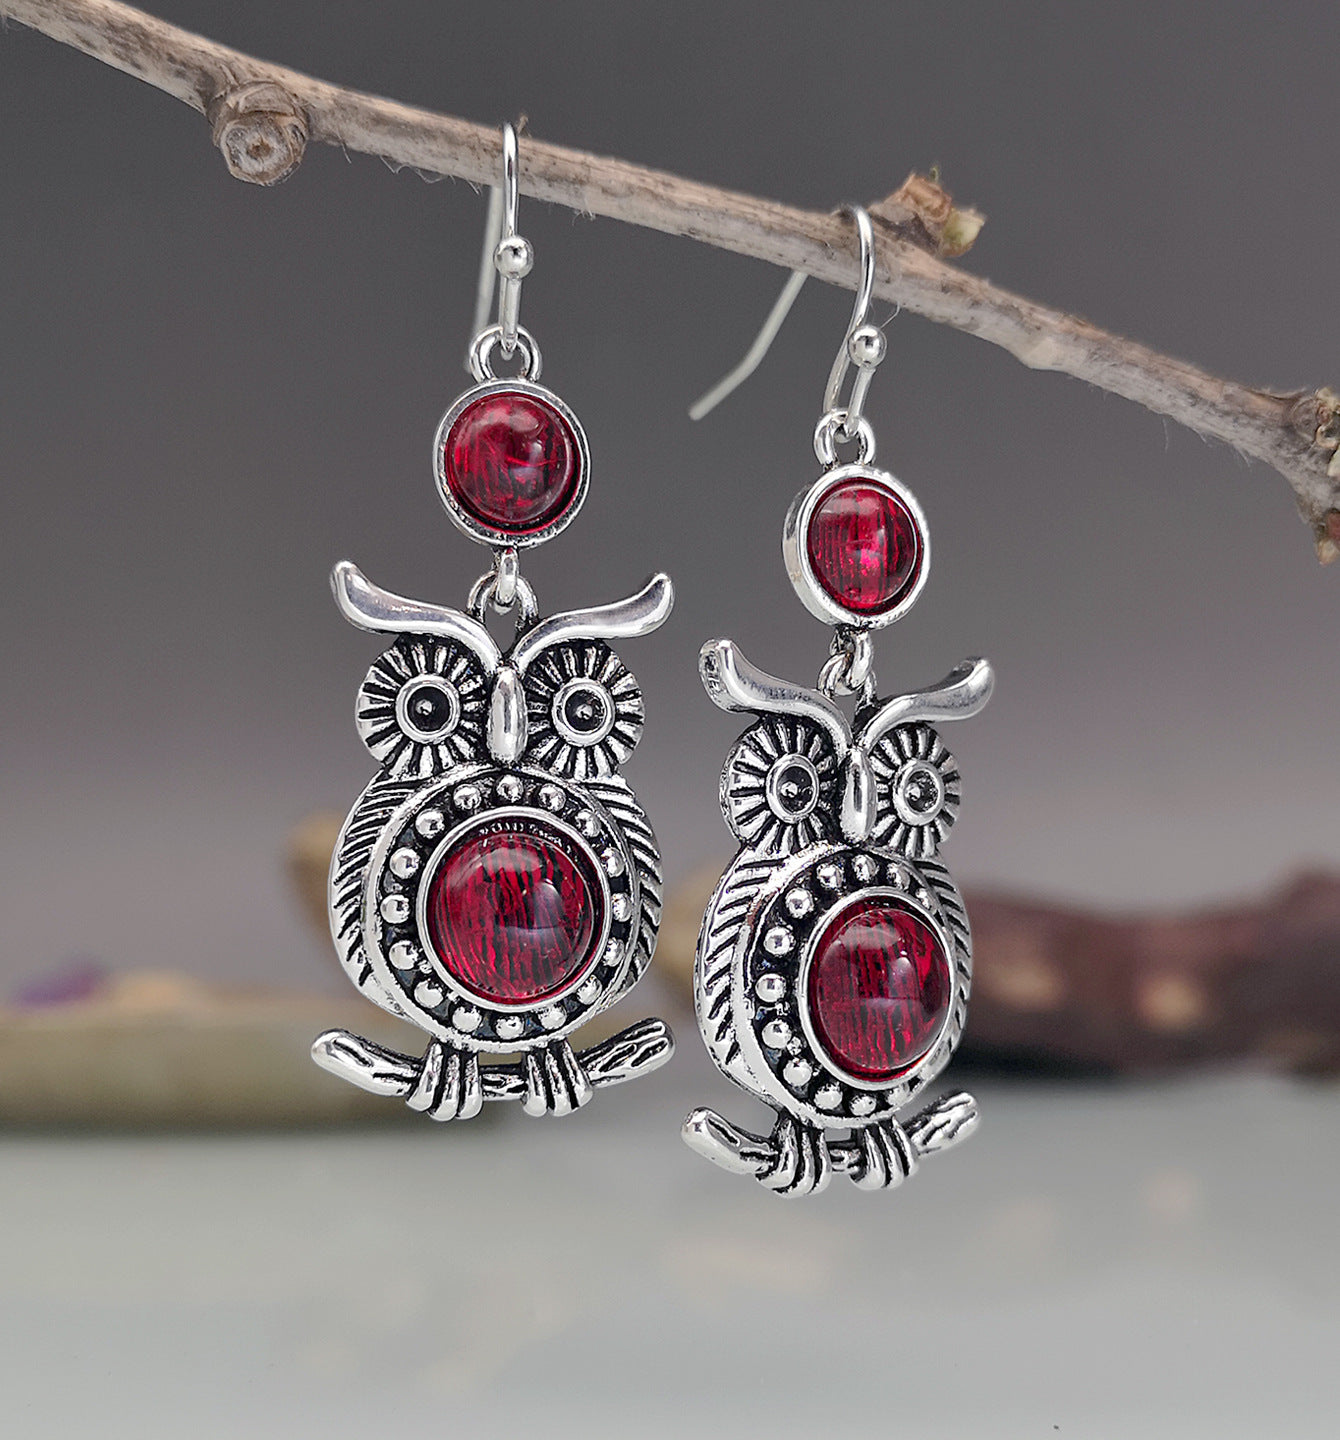 New lace ruby and owl earrings-canovaniajewelry